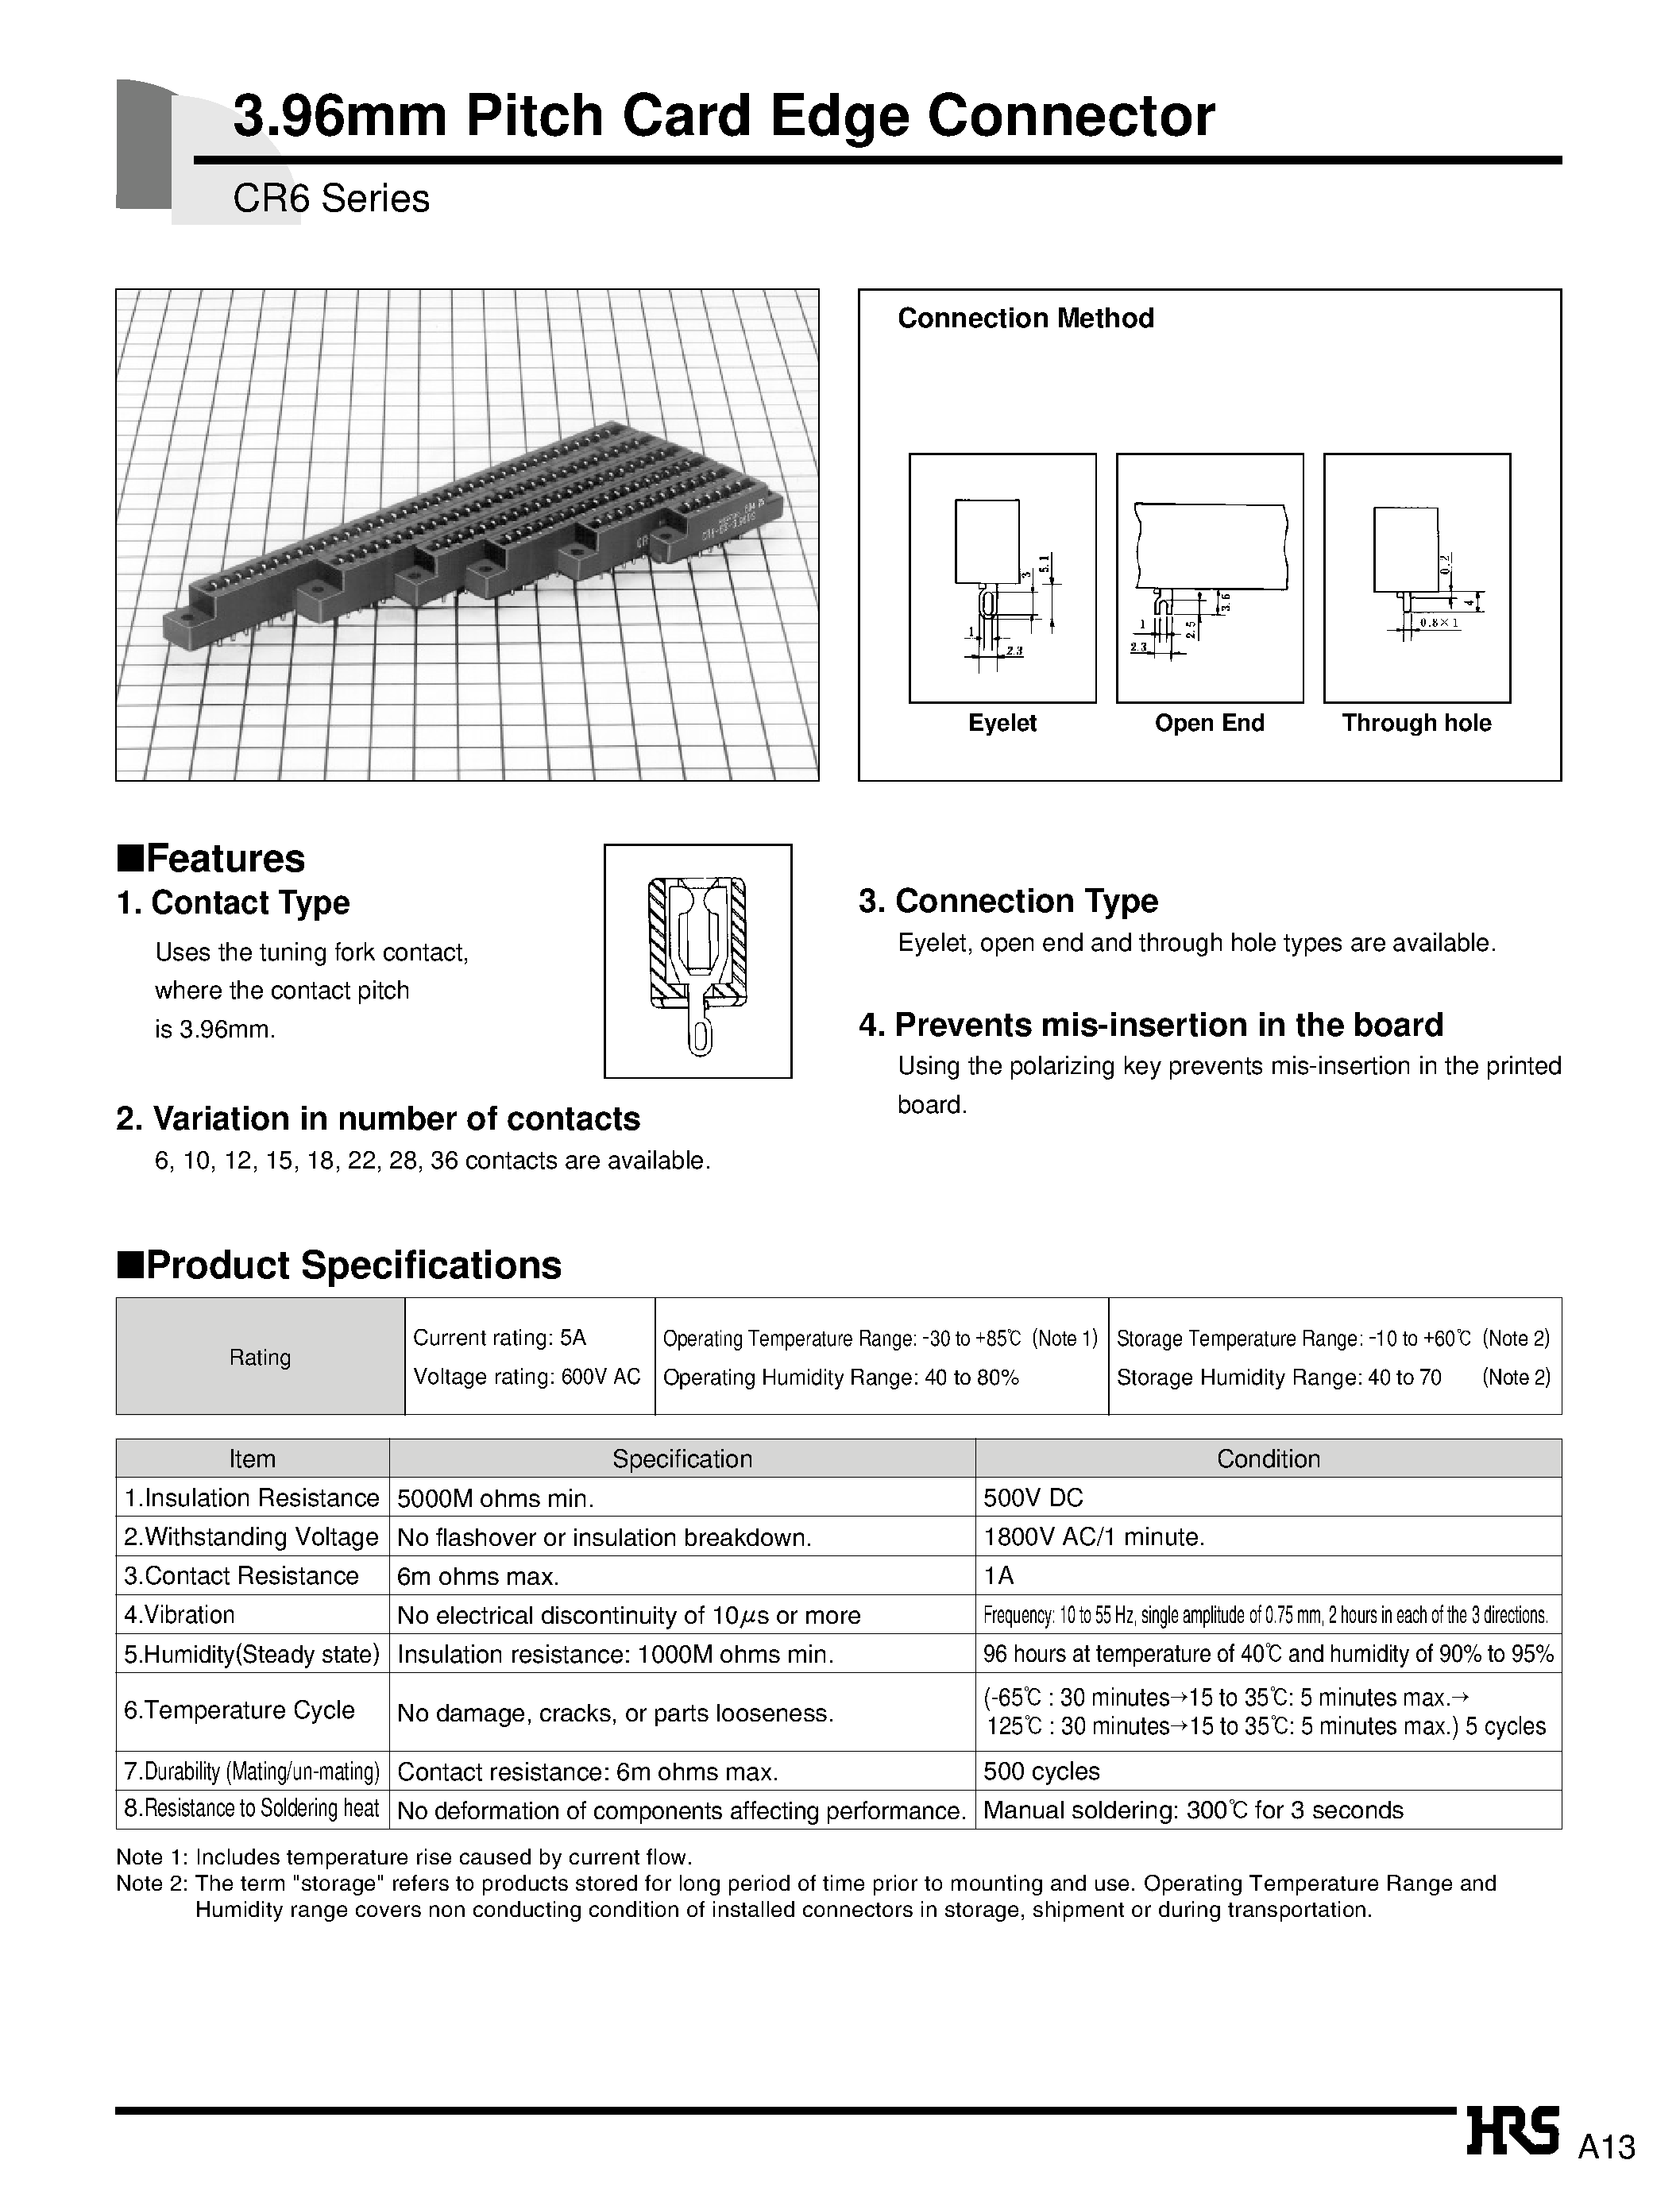 Datasheet CR6-15S-3.96DS - 3.96mm Pitch Card Edge Connector page 1